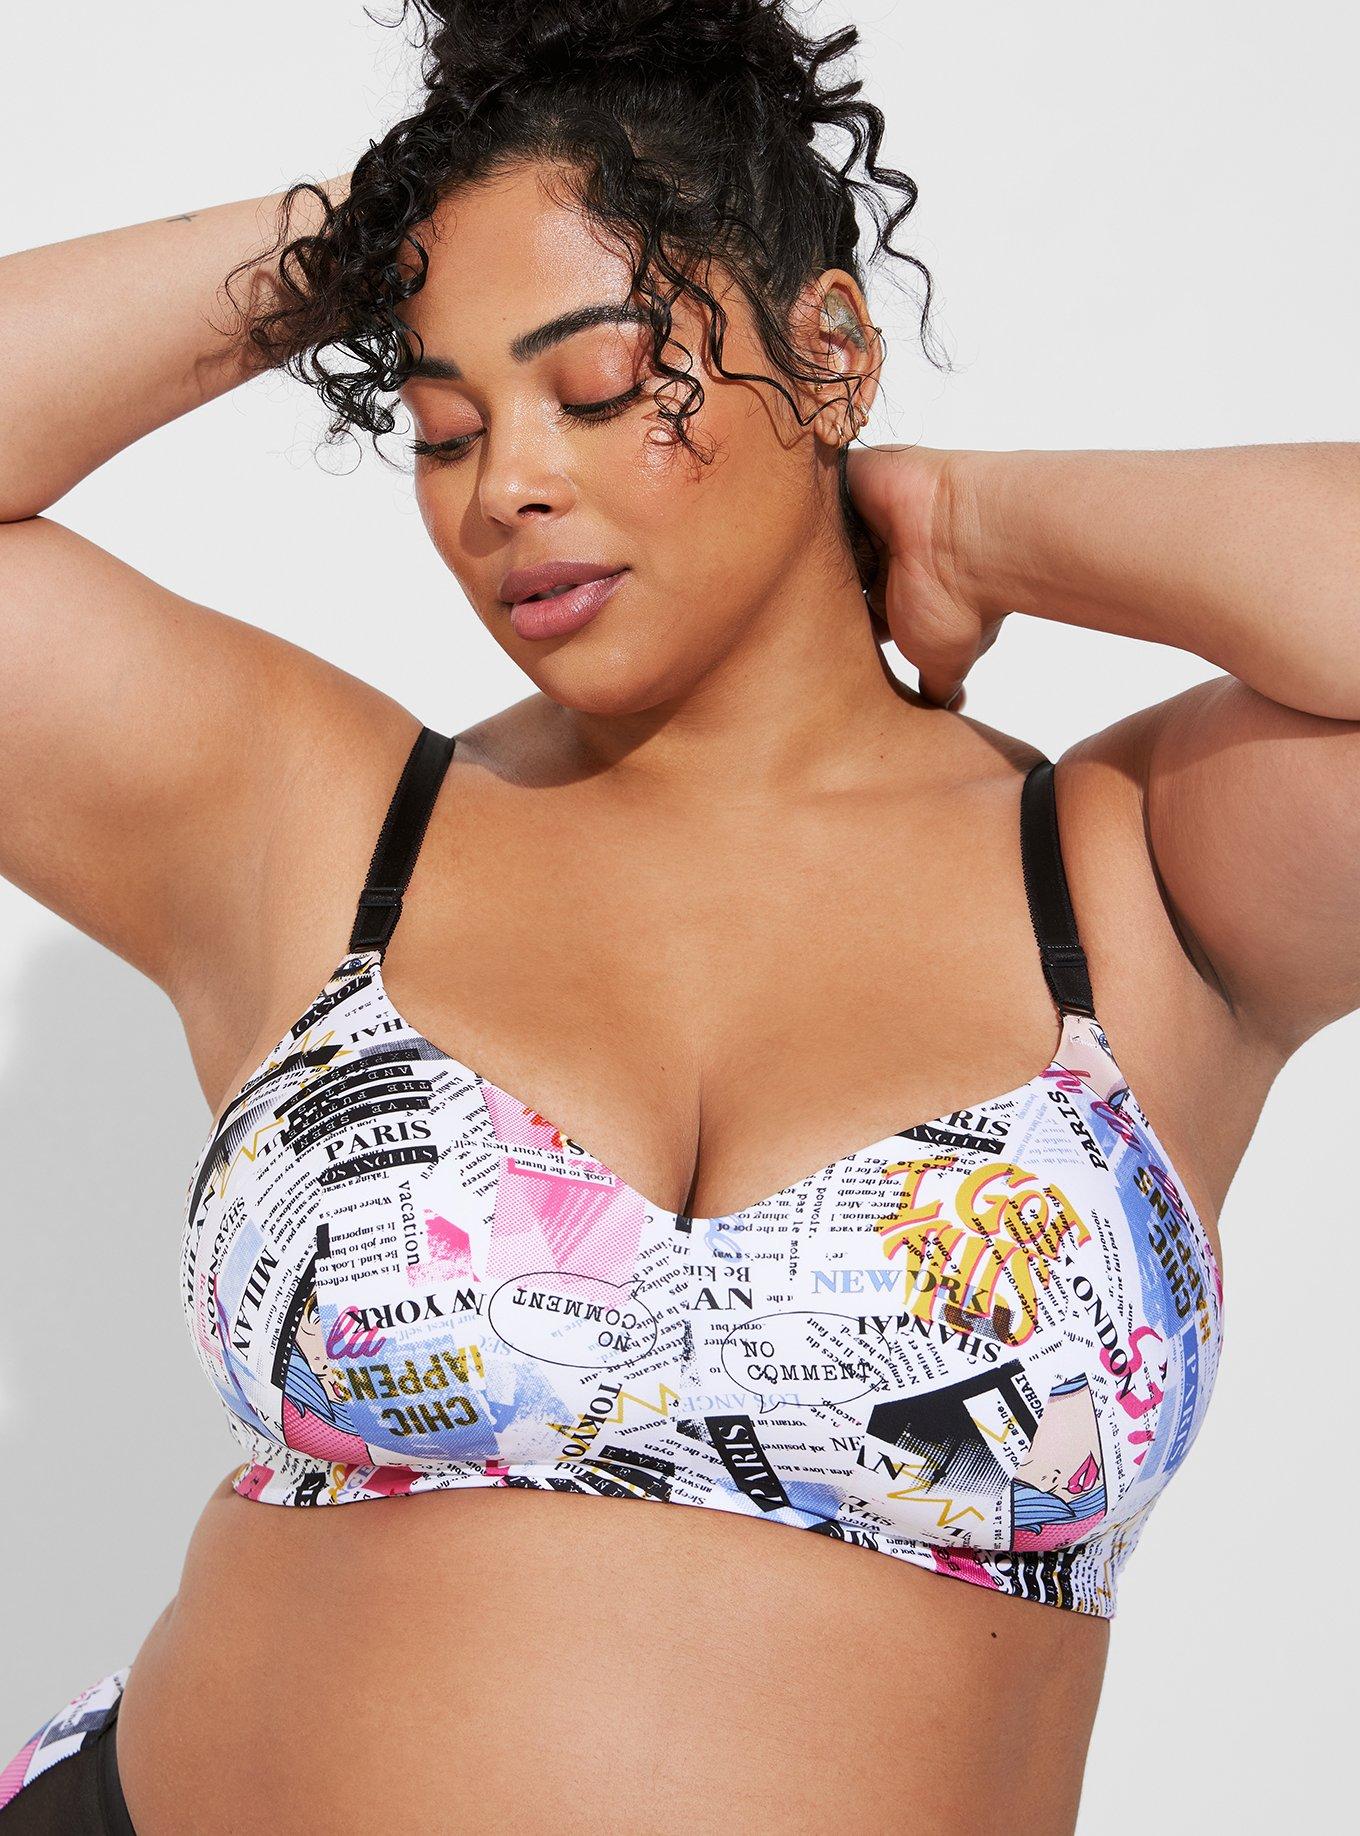 THE BEST PLUS-SIZE BRAS EVER!!! *HONEST REVIEW* TORRID Bras Try-on Haul (42F)